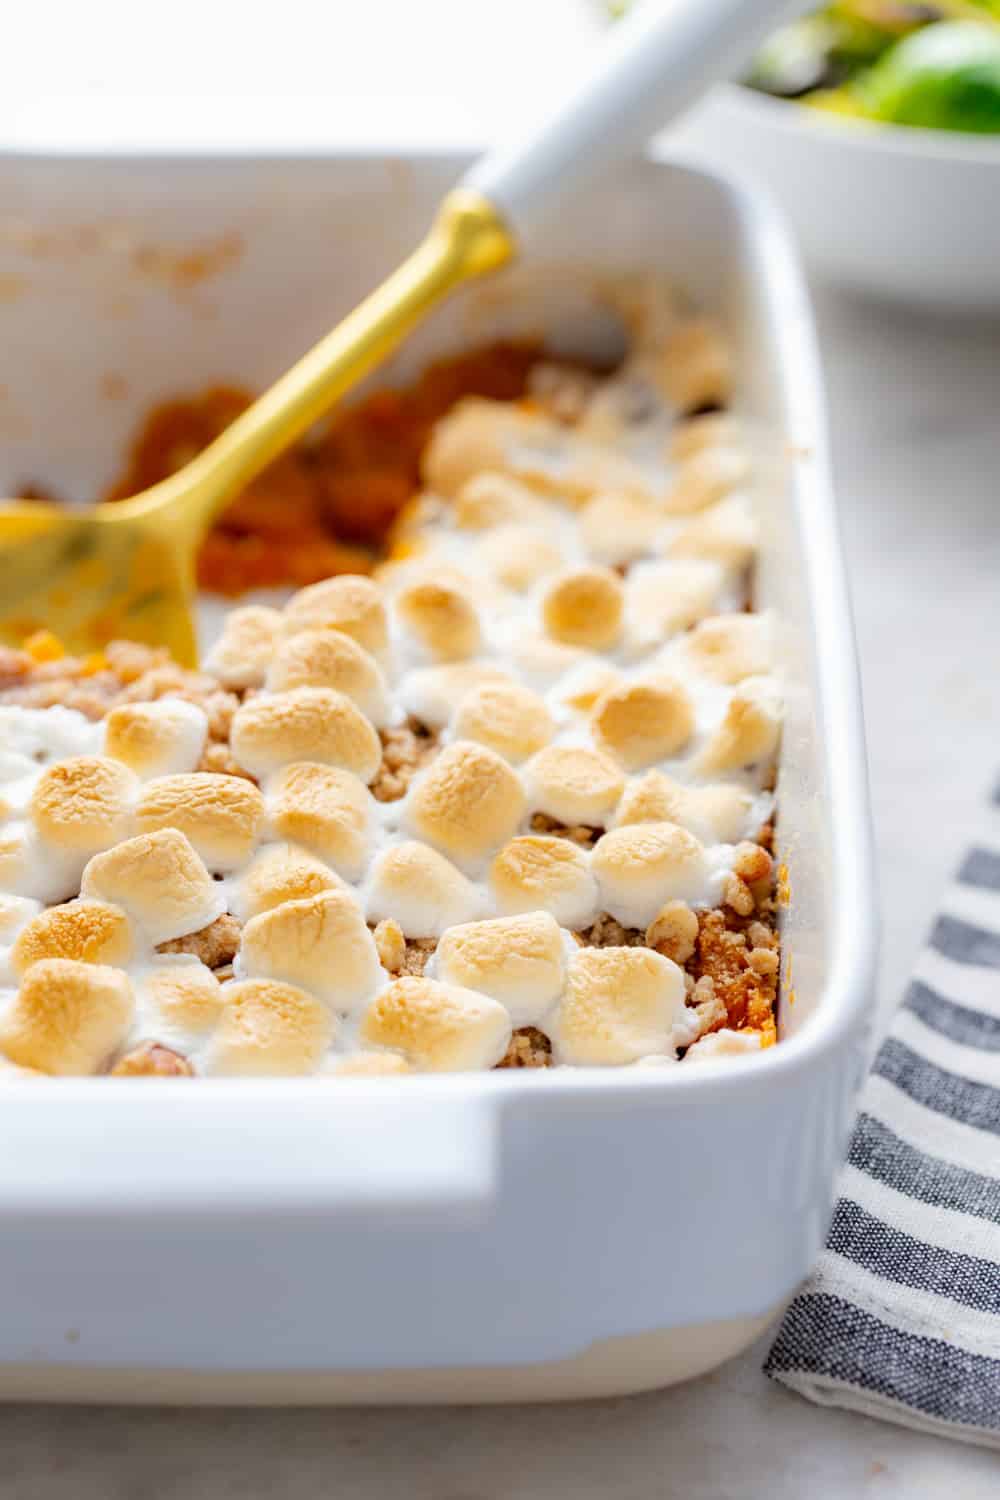 Close-up view of marshmallows and streusel topping on sweet potato casserole